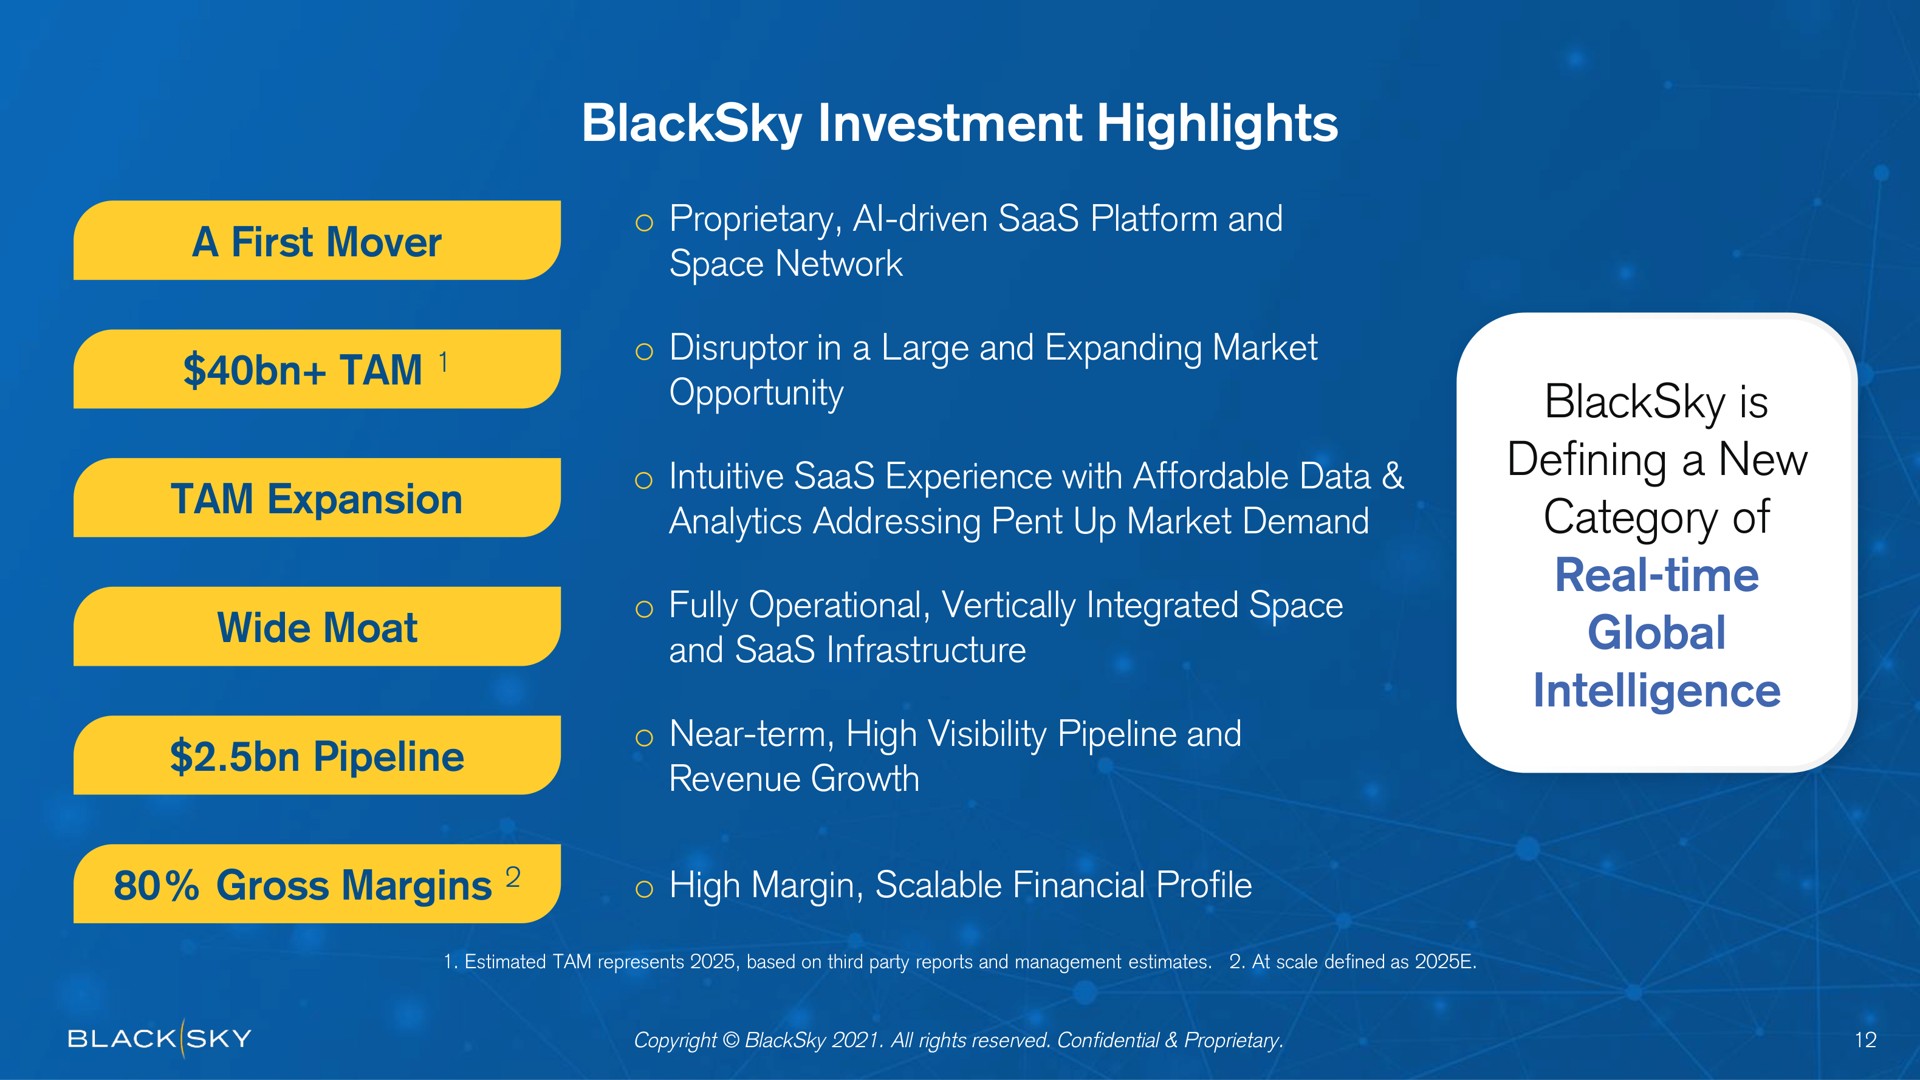 investment highlights is defining a new category of real time global intelligence | BlackSky